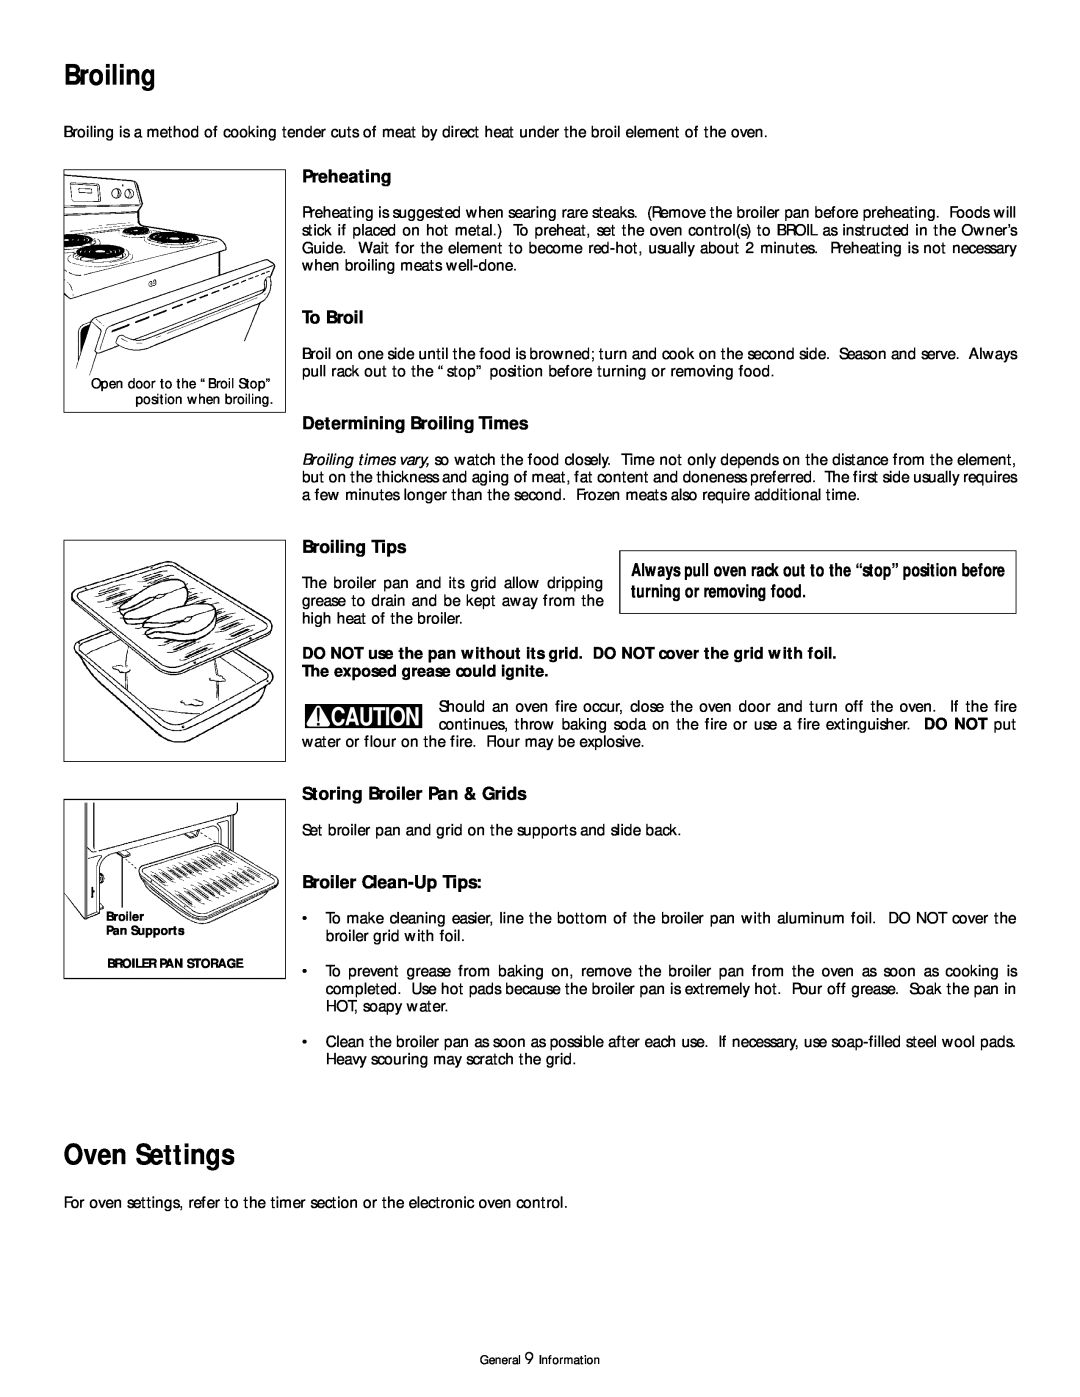 Frigidaire 318200404 manual Oven Settings, Preheating, To Broil, Determining Broiling Times, Broiling Tips 